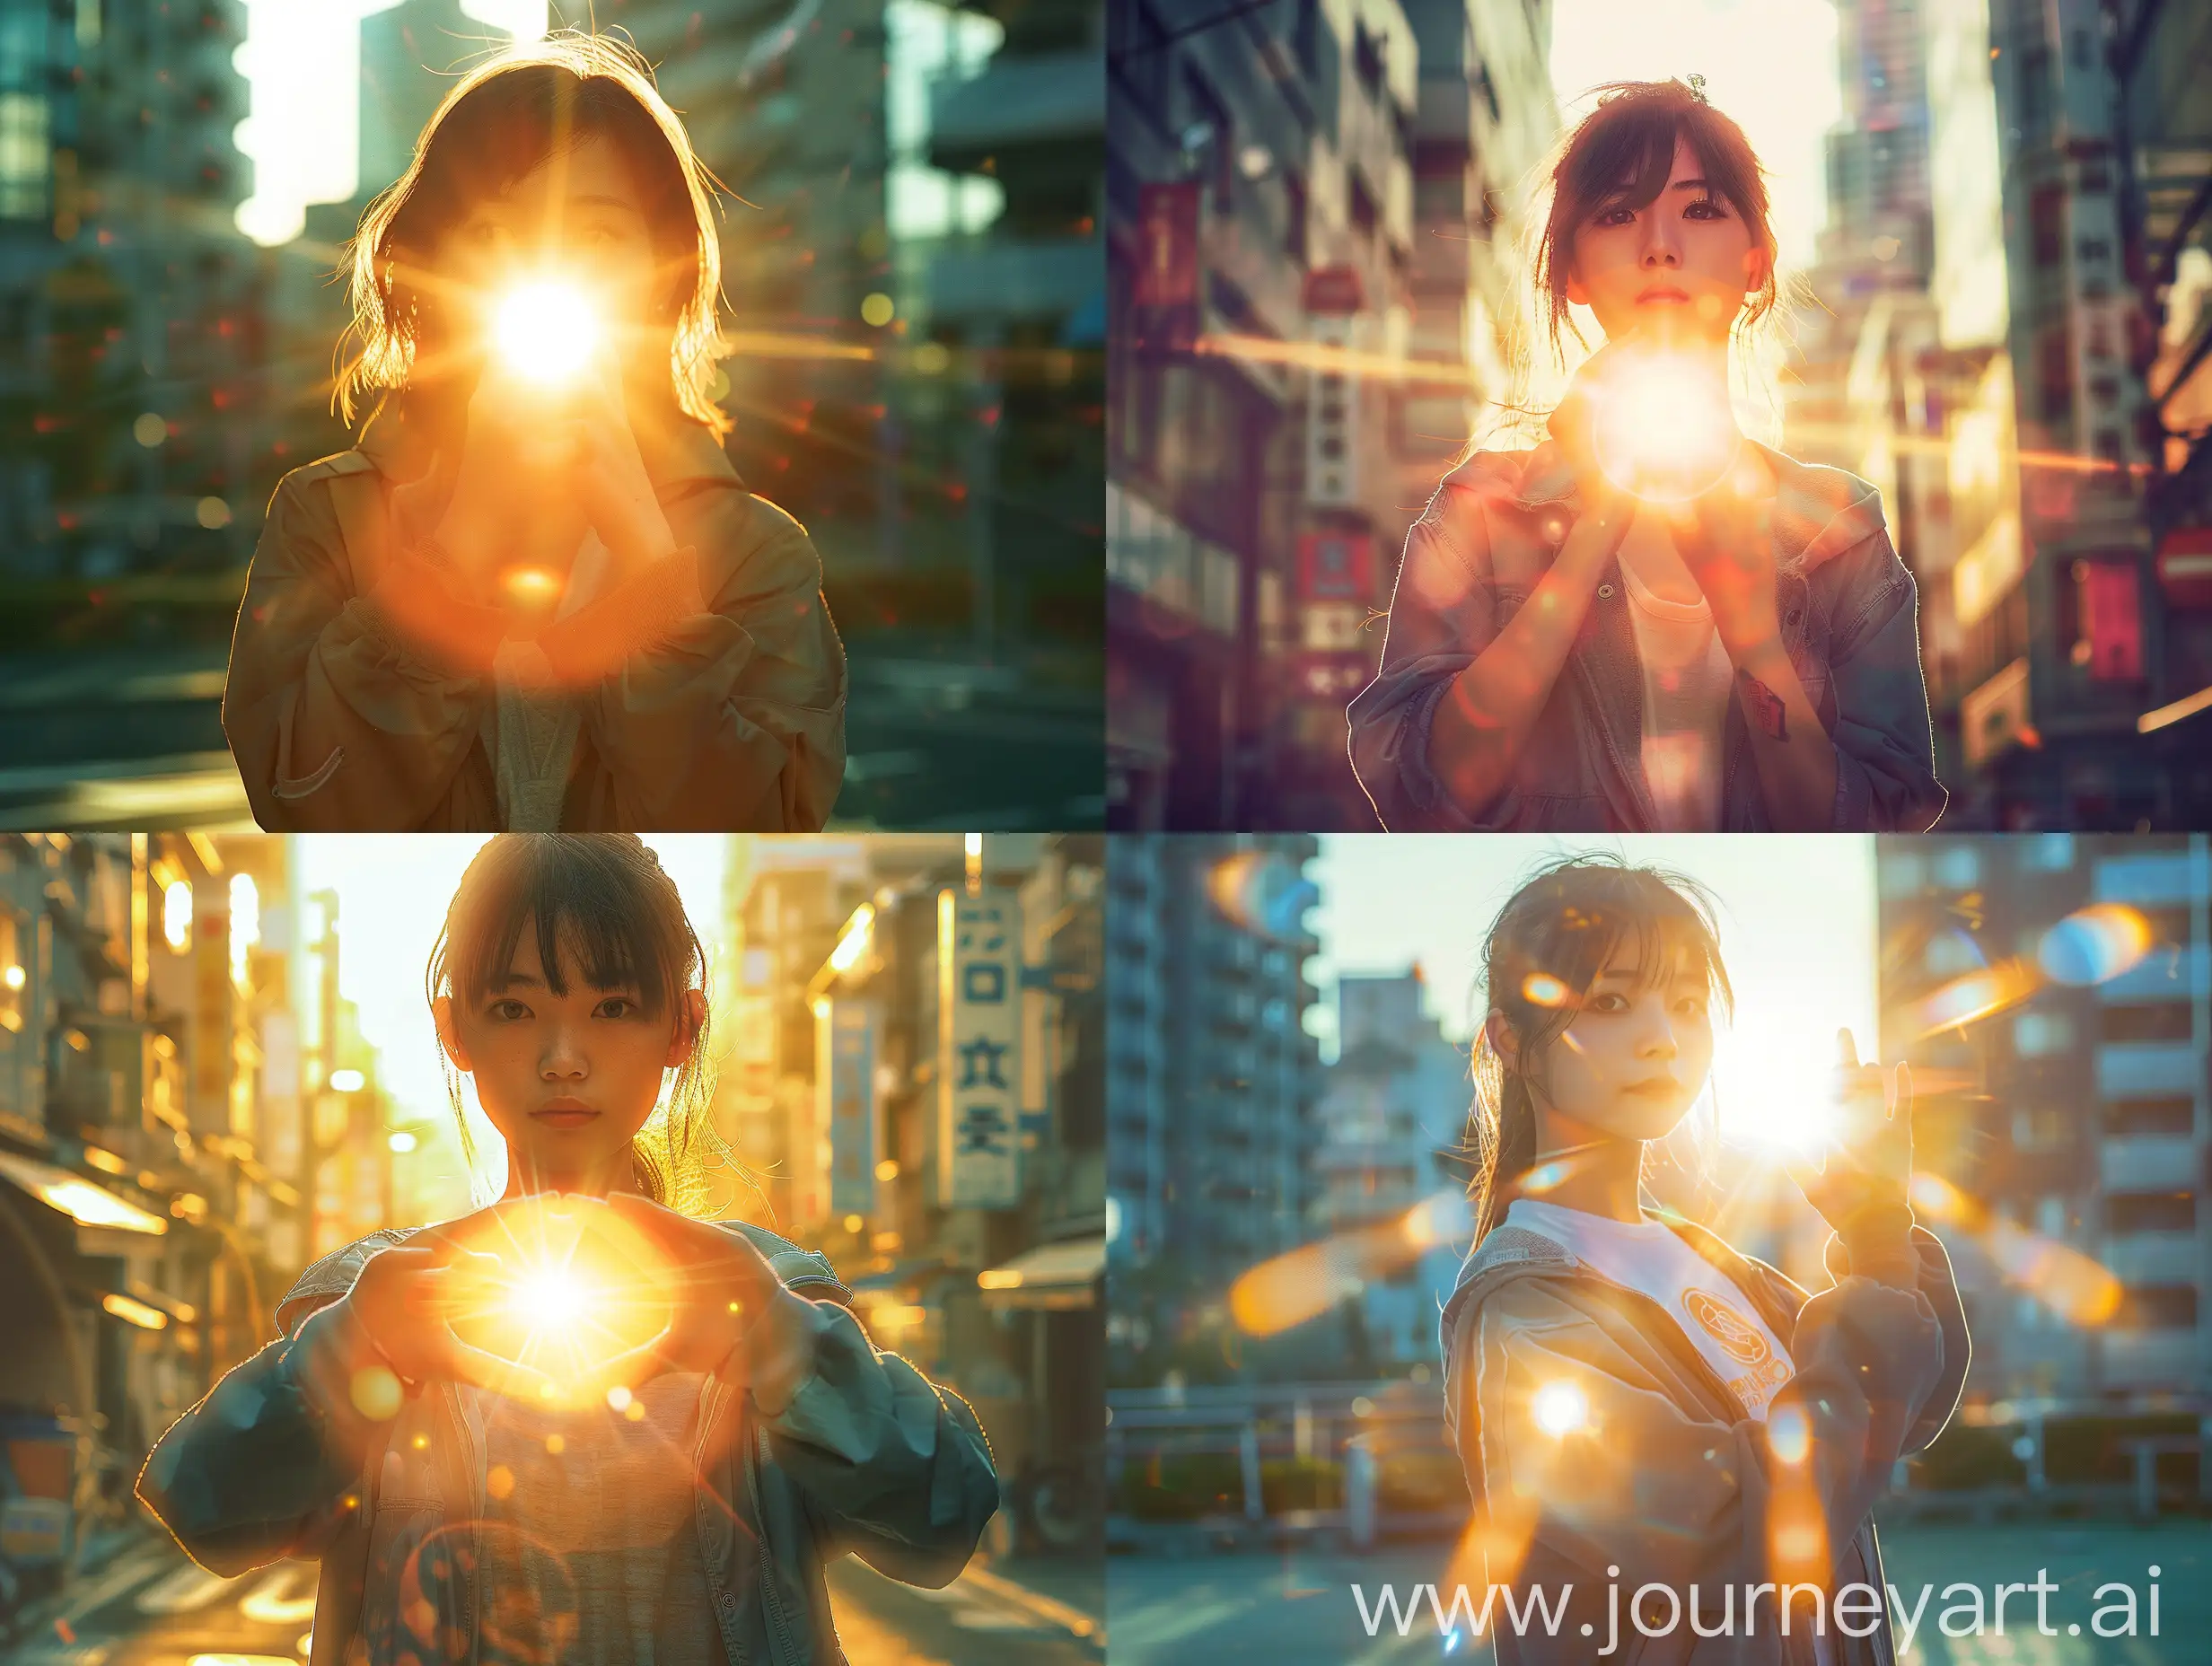 Japanese girl grips the sun amidst an urban backdrop, clothing casual and sporty, portrait exuding the visual flair of artists Carne Griffiths, full body, full shot, wide angle, Peter Lik, and Ralph Horsley, chiaroscuro enhancing the central figure, volumetric light casting diffuse illumination, reflections adding depth, cinematic light and effects heightening the scene's drama, executed in ultra fine detail, superior high quality, reminiscent of a realistic